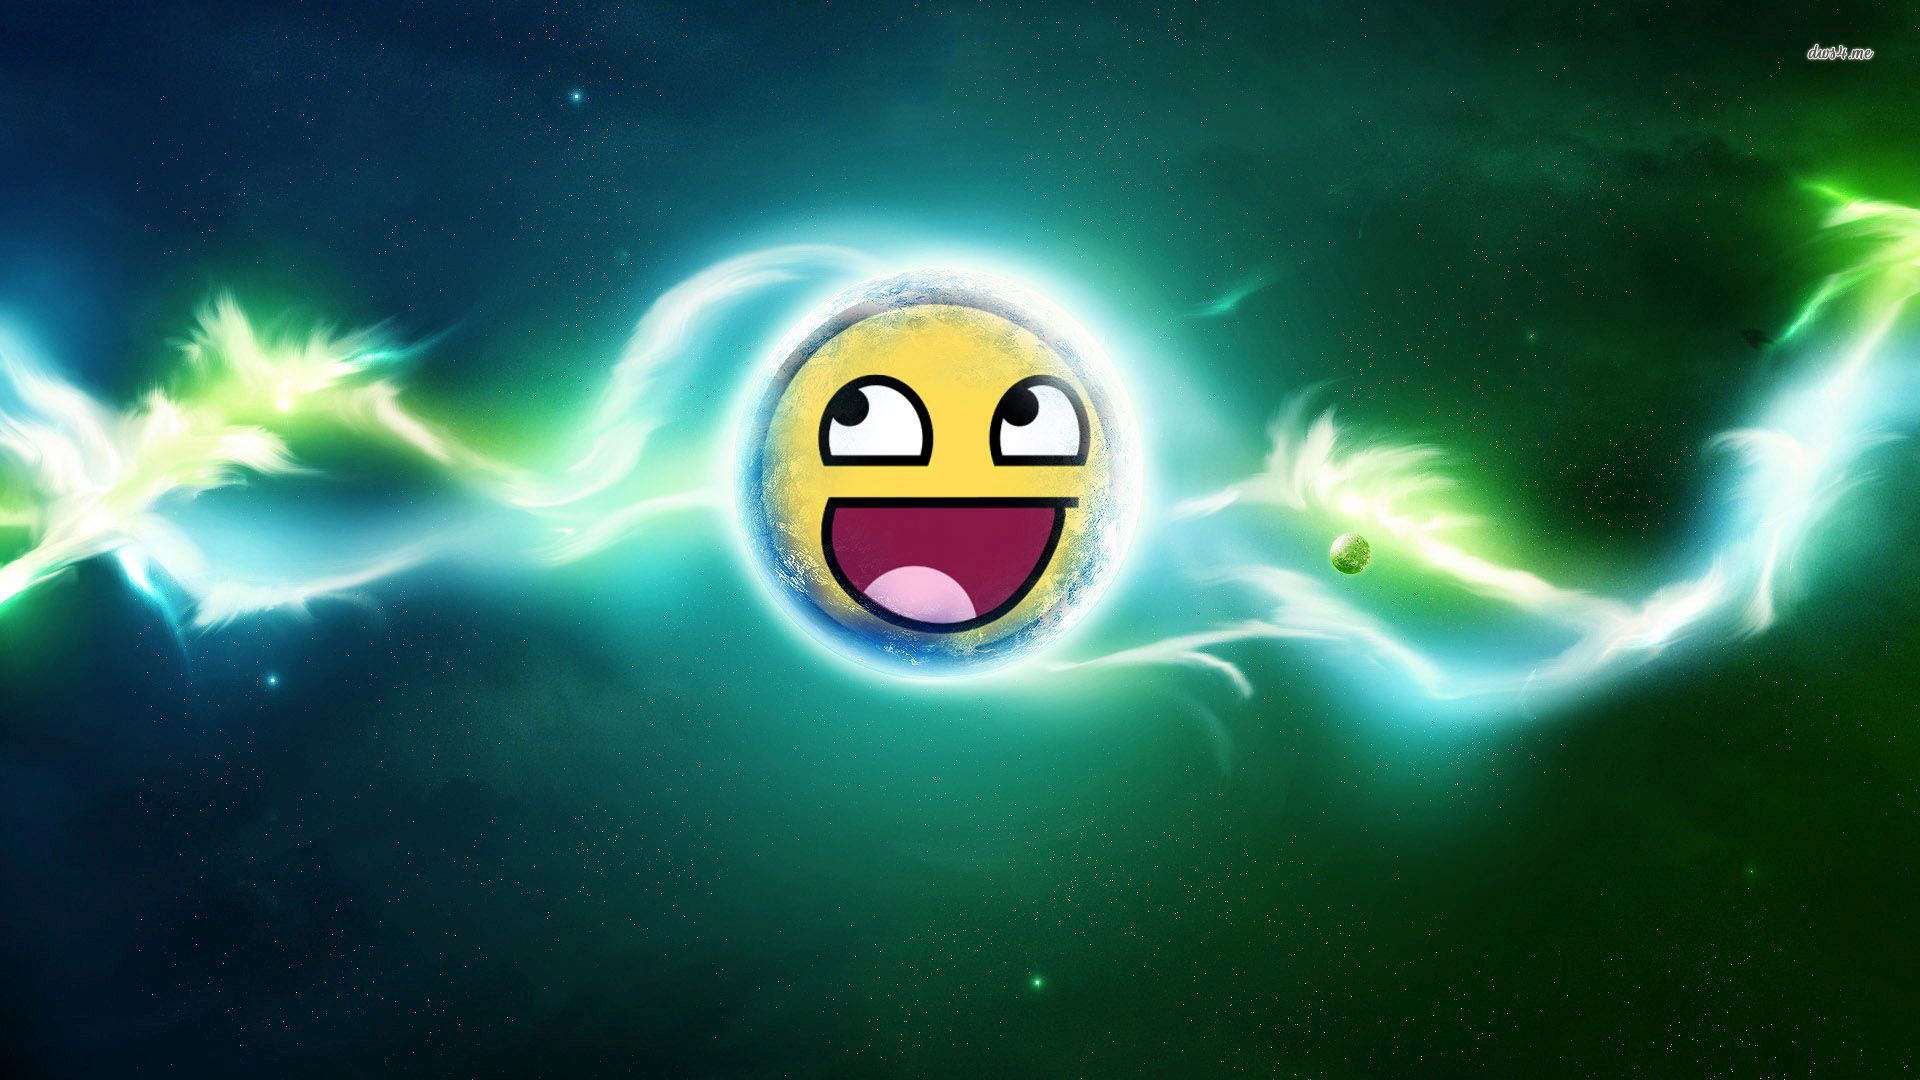 Awesome Face In Space Meme Wallpaper